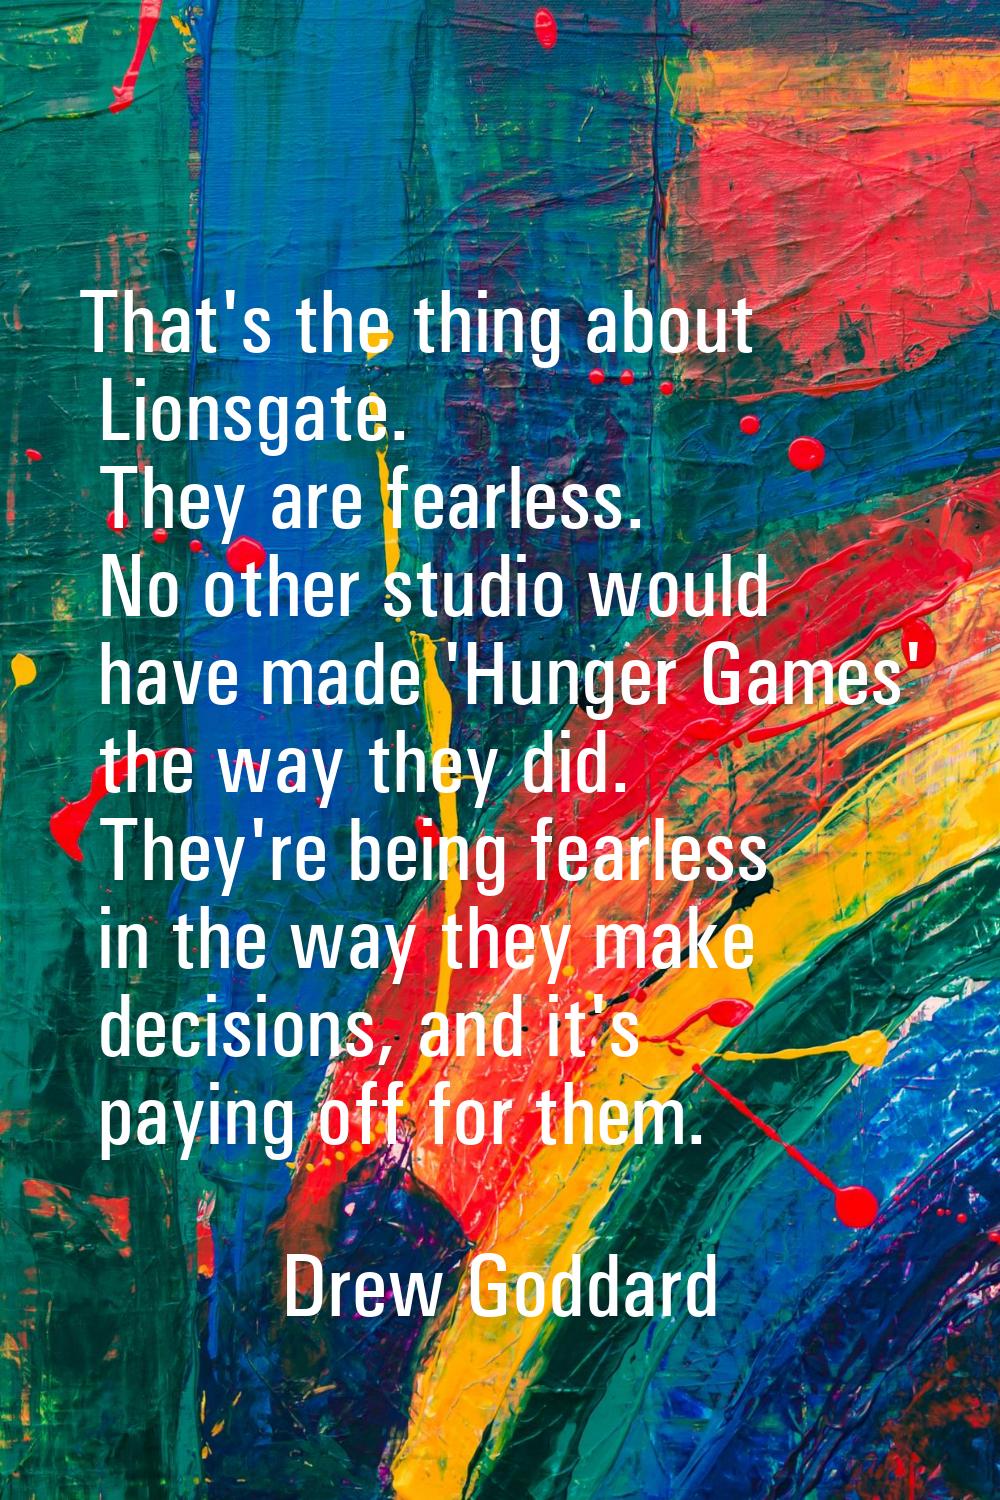 That's the thing about Lionsgate. They are fearless. No other studio would have made 'Hunger Games'